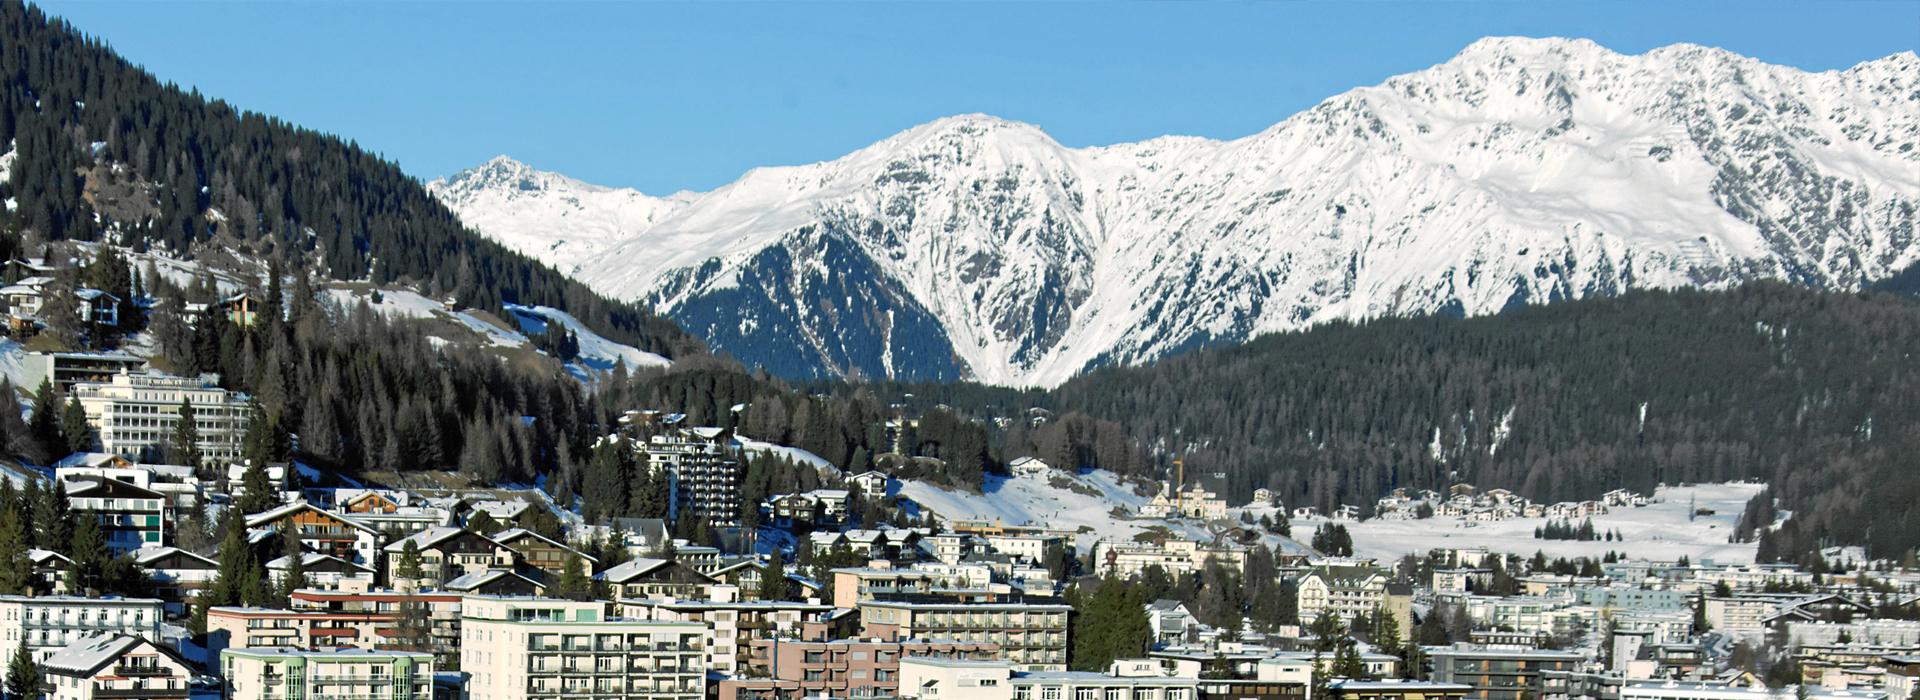 The original birthplace of skiing in the Swiss Alps, Davos and Klosters between them are host to 6 different ski areas with over 300km of pistes.